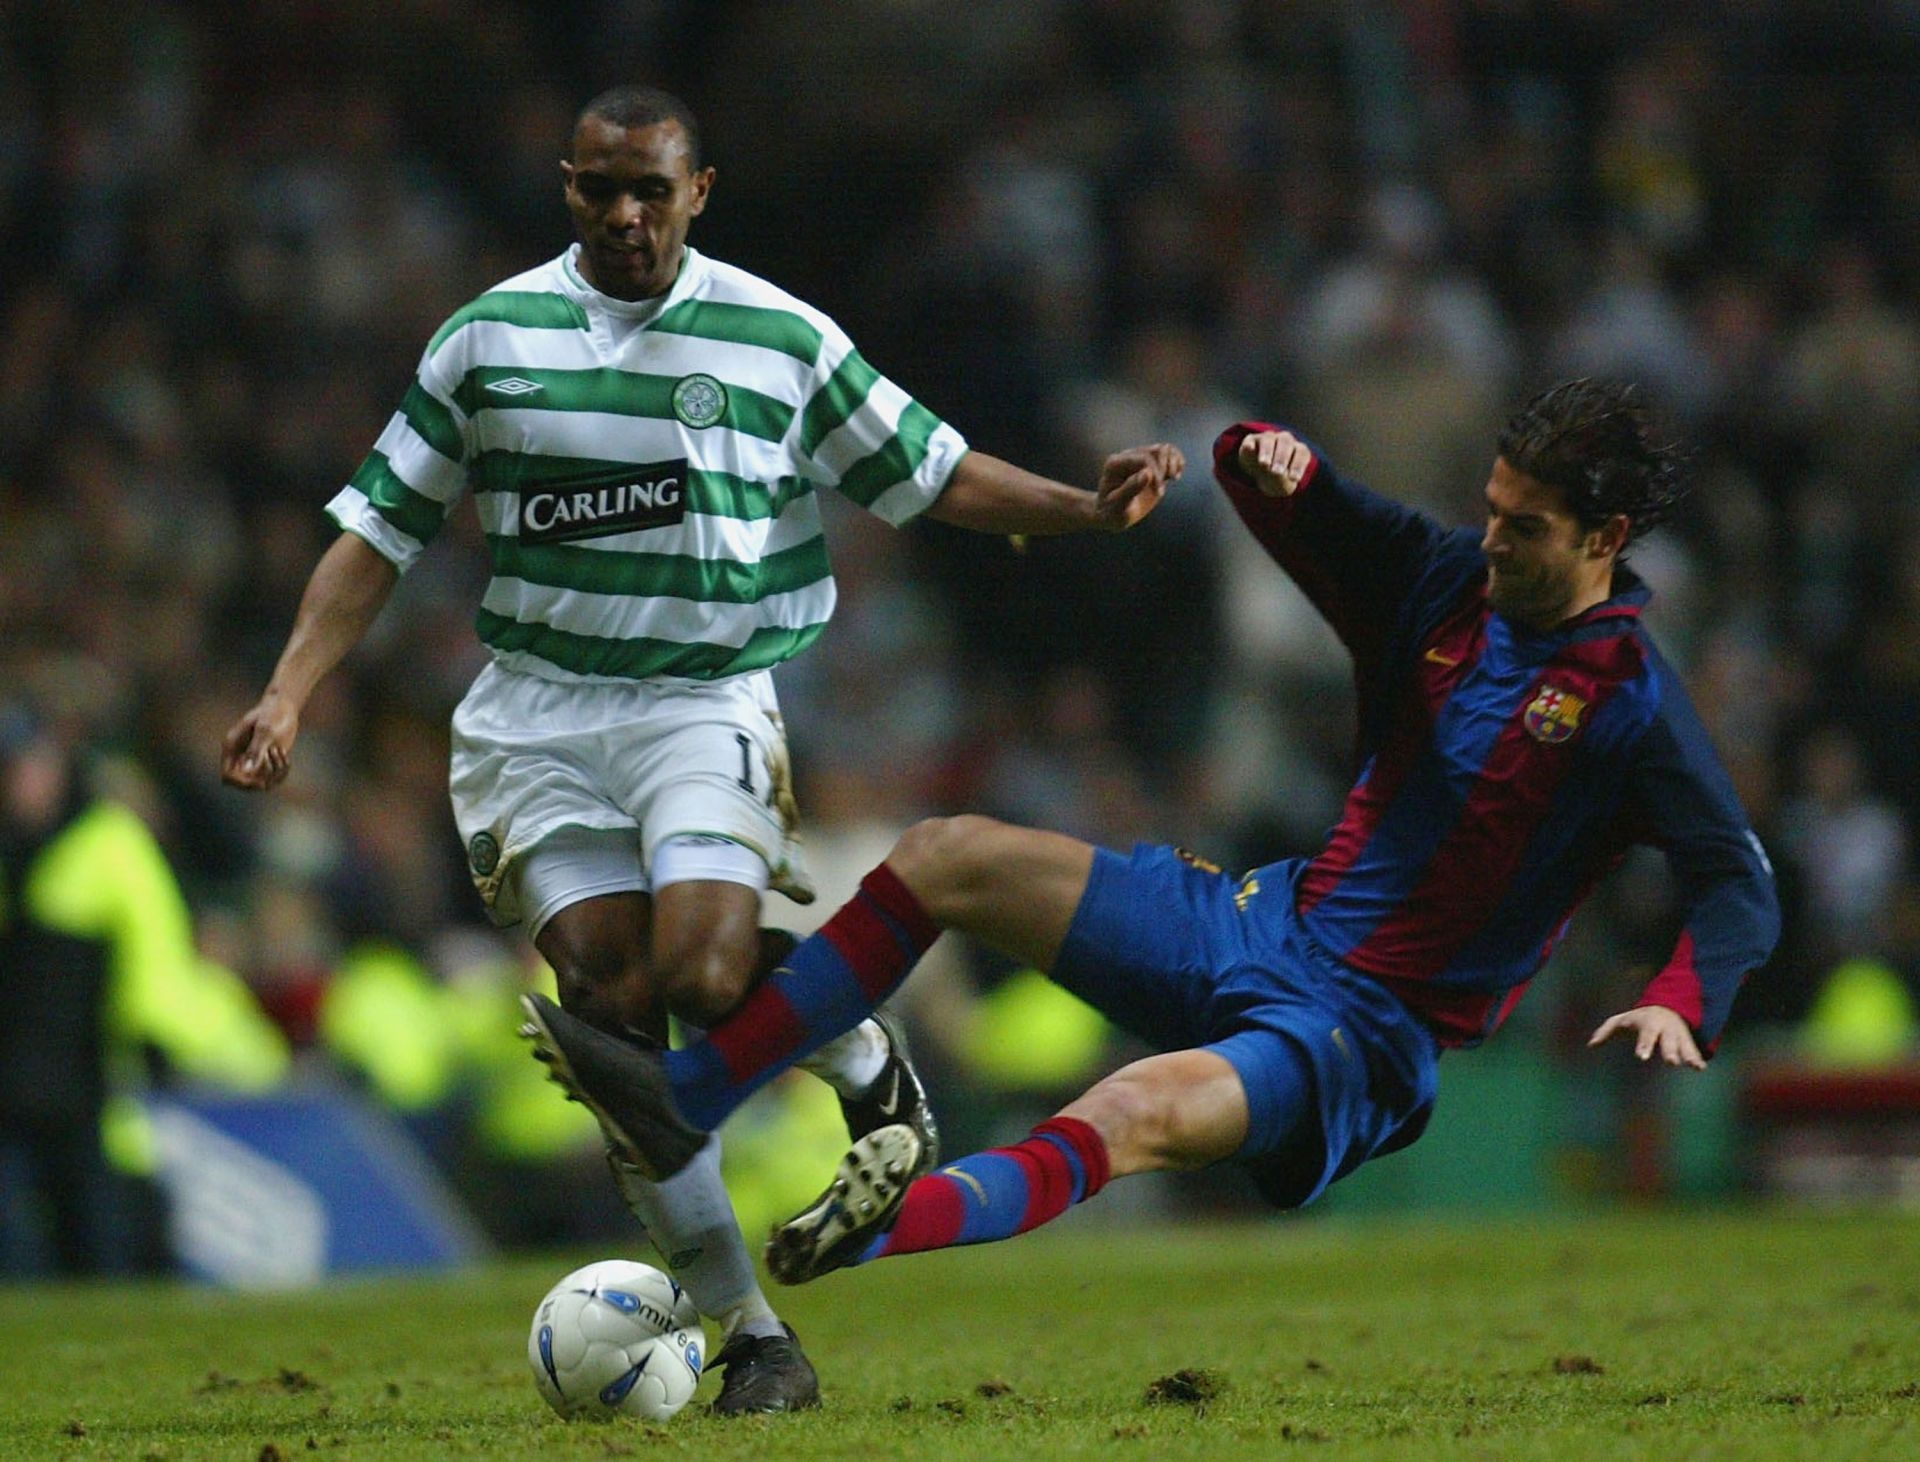 Lopez (right) challenges for the ball in UEFA Cup 4th round game vs Celtic